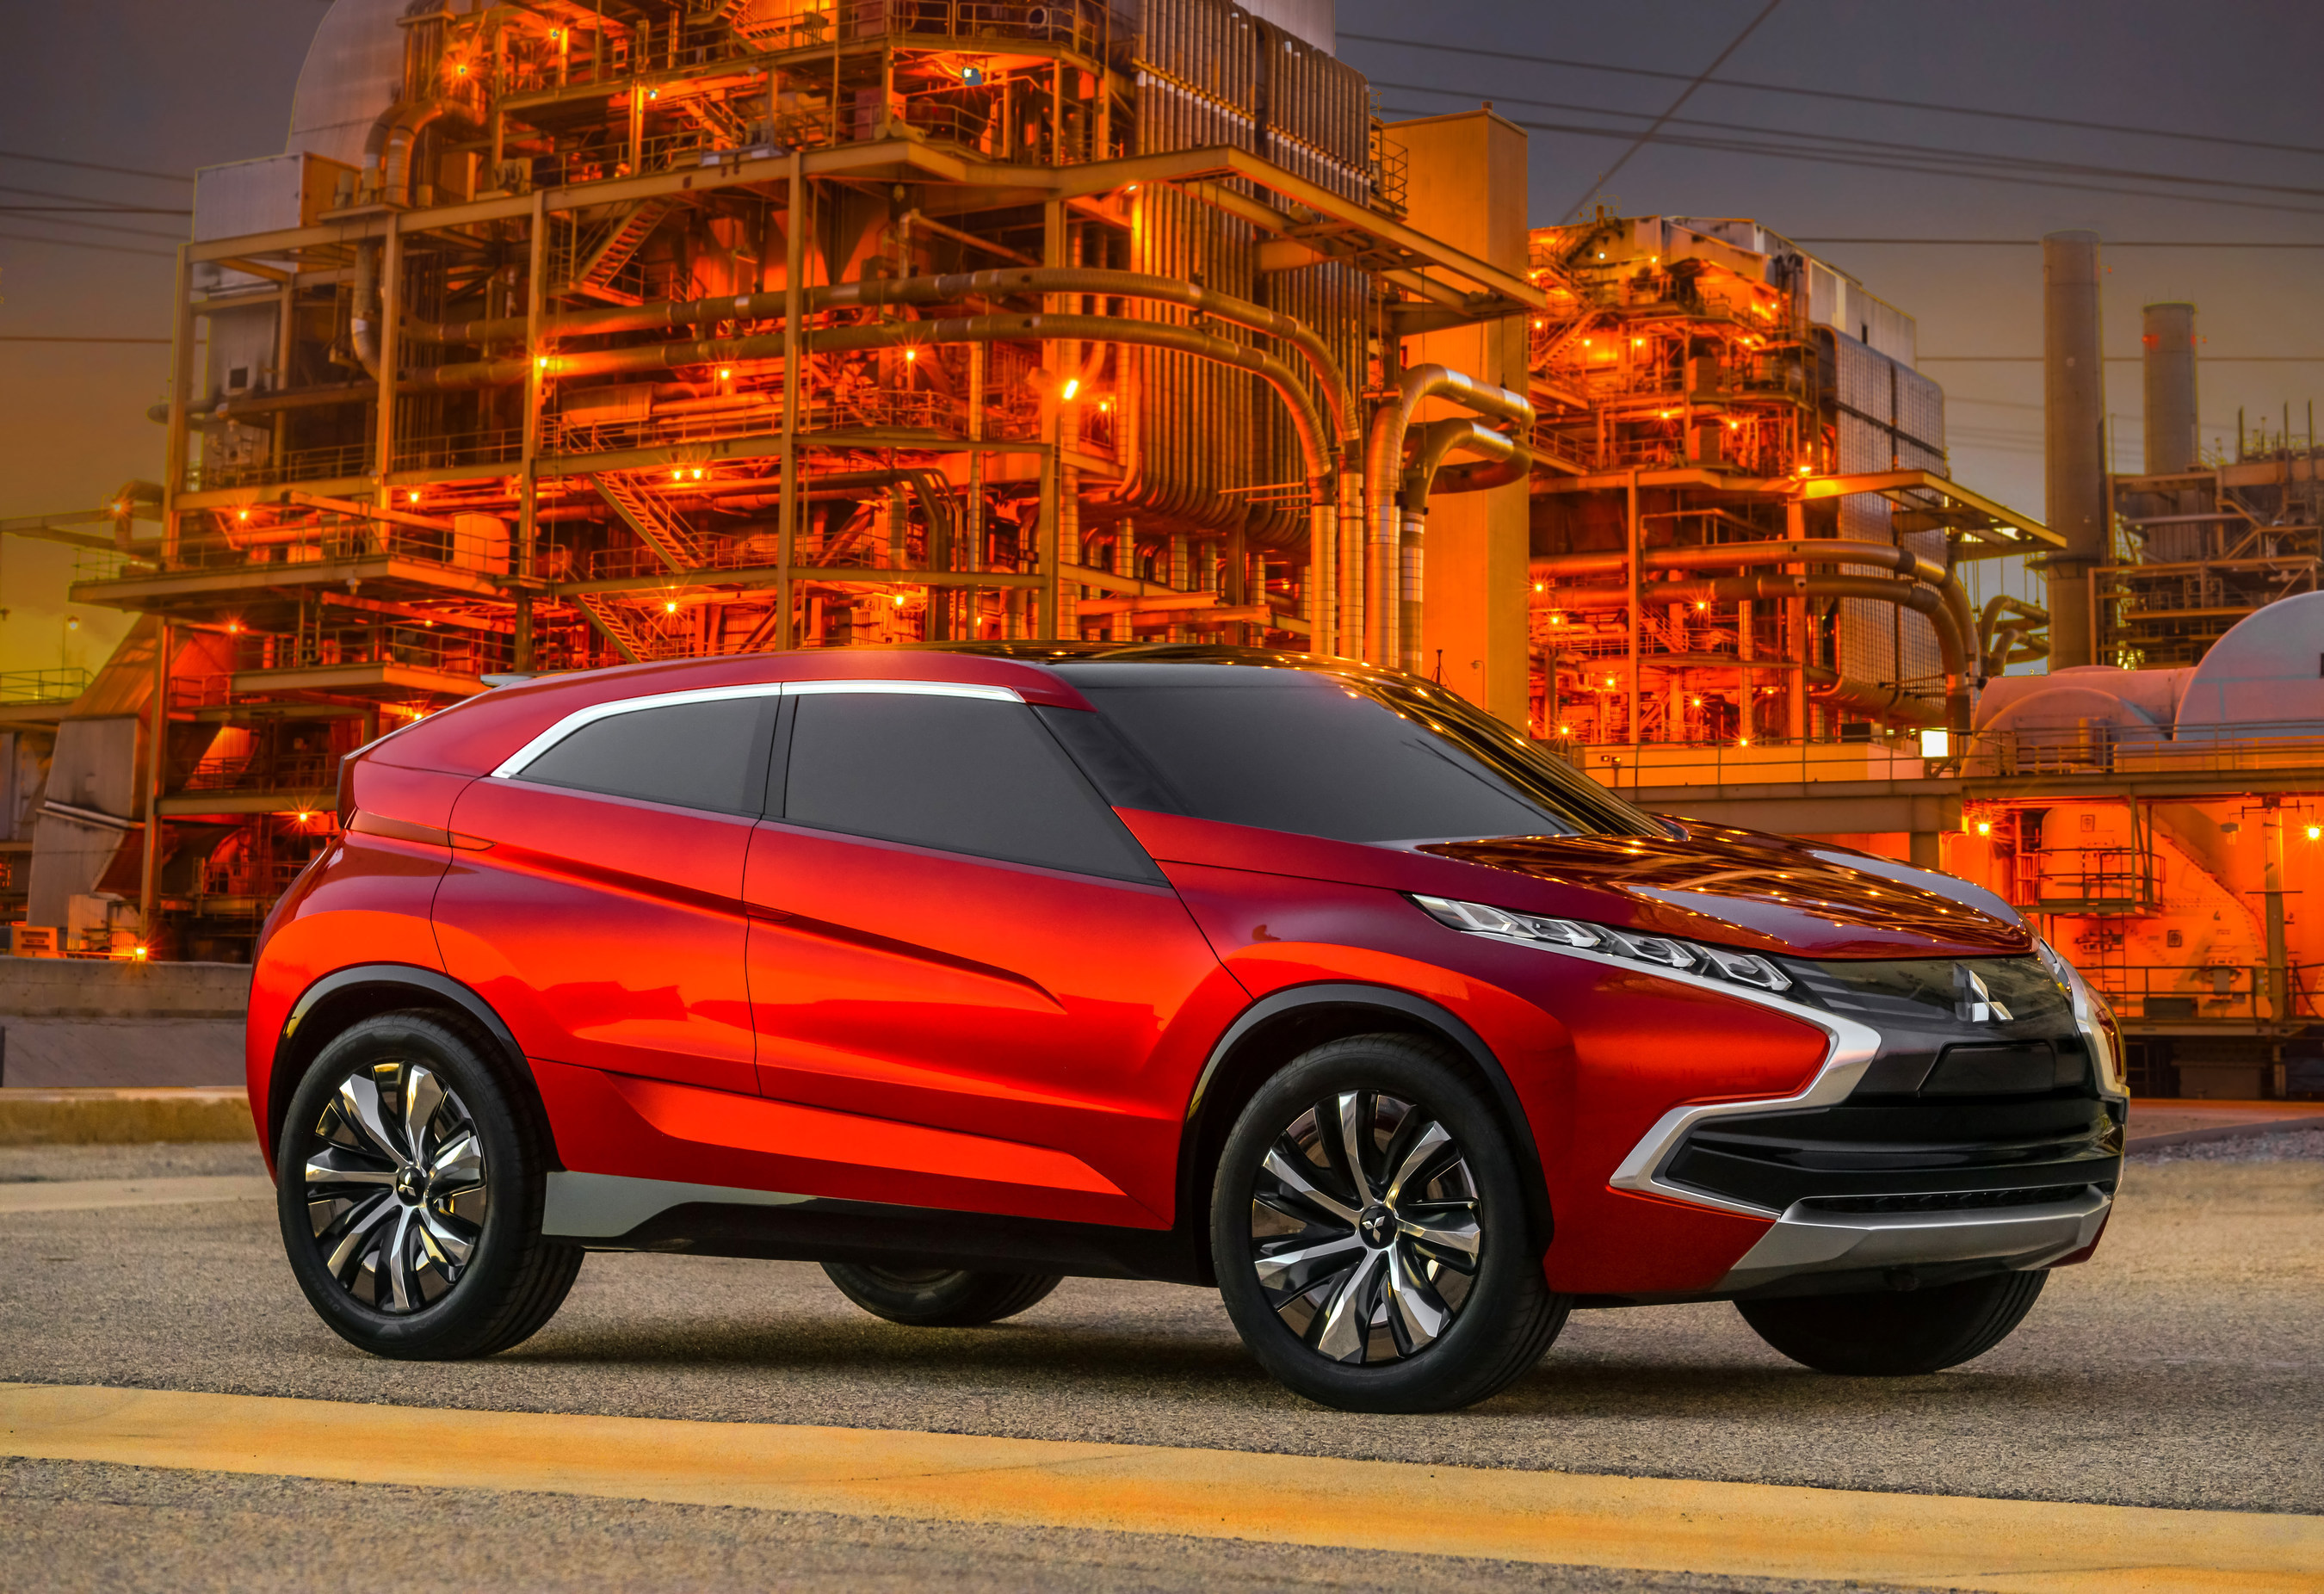 The Mitsubishi Concept XR-PHEV made its North American debut at the Los Angeles Auto Show